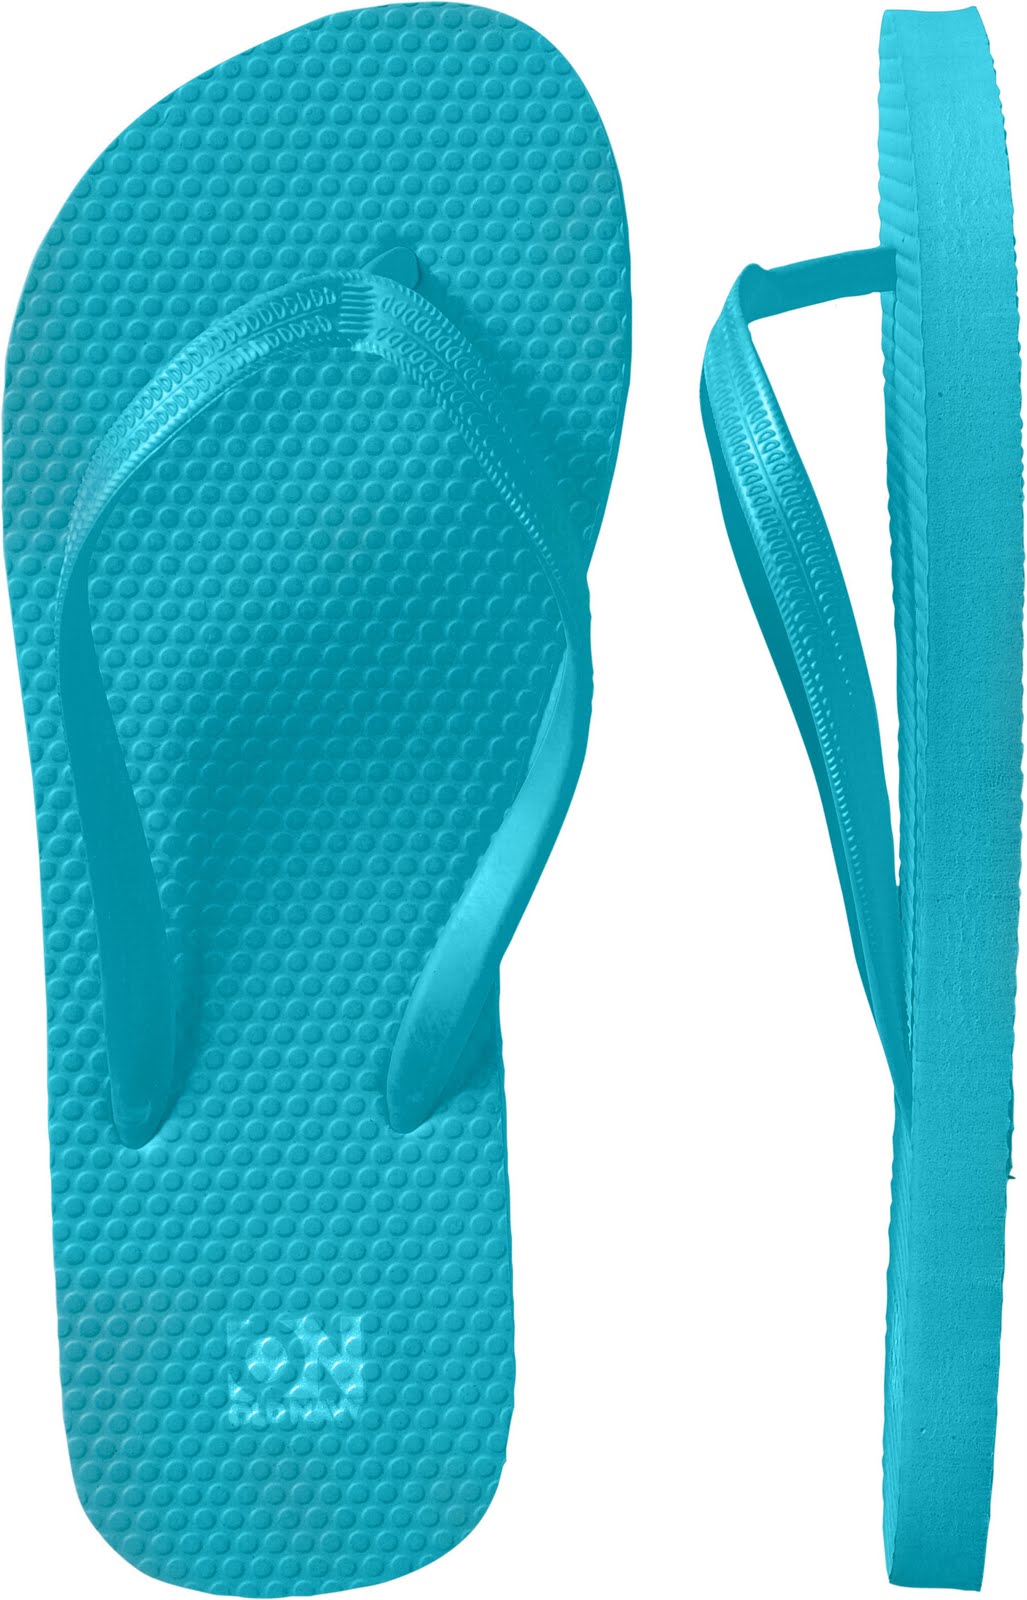 you wear a pair of flip flops more comfortable old navy flip flops and ...